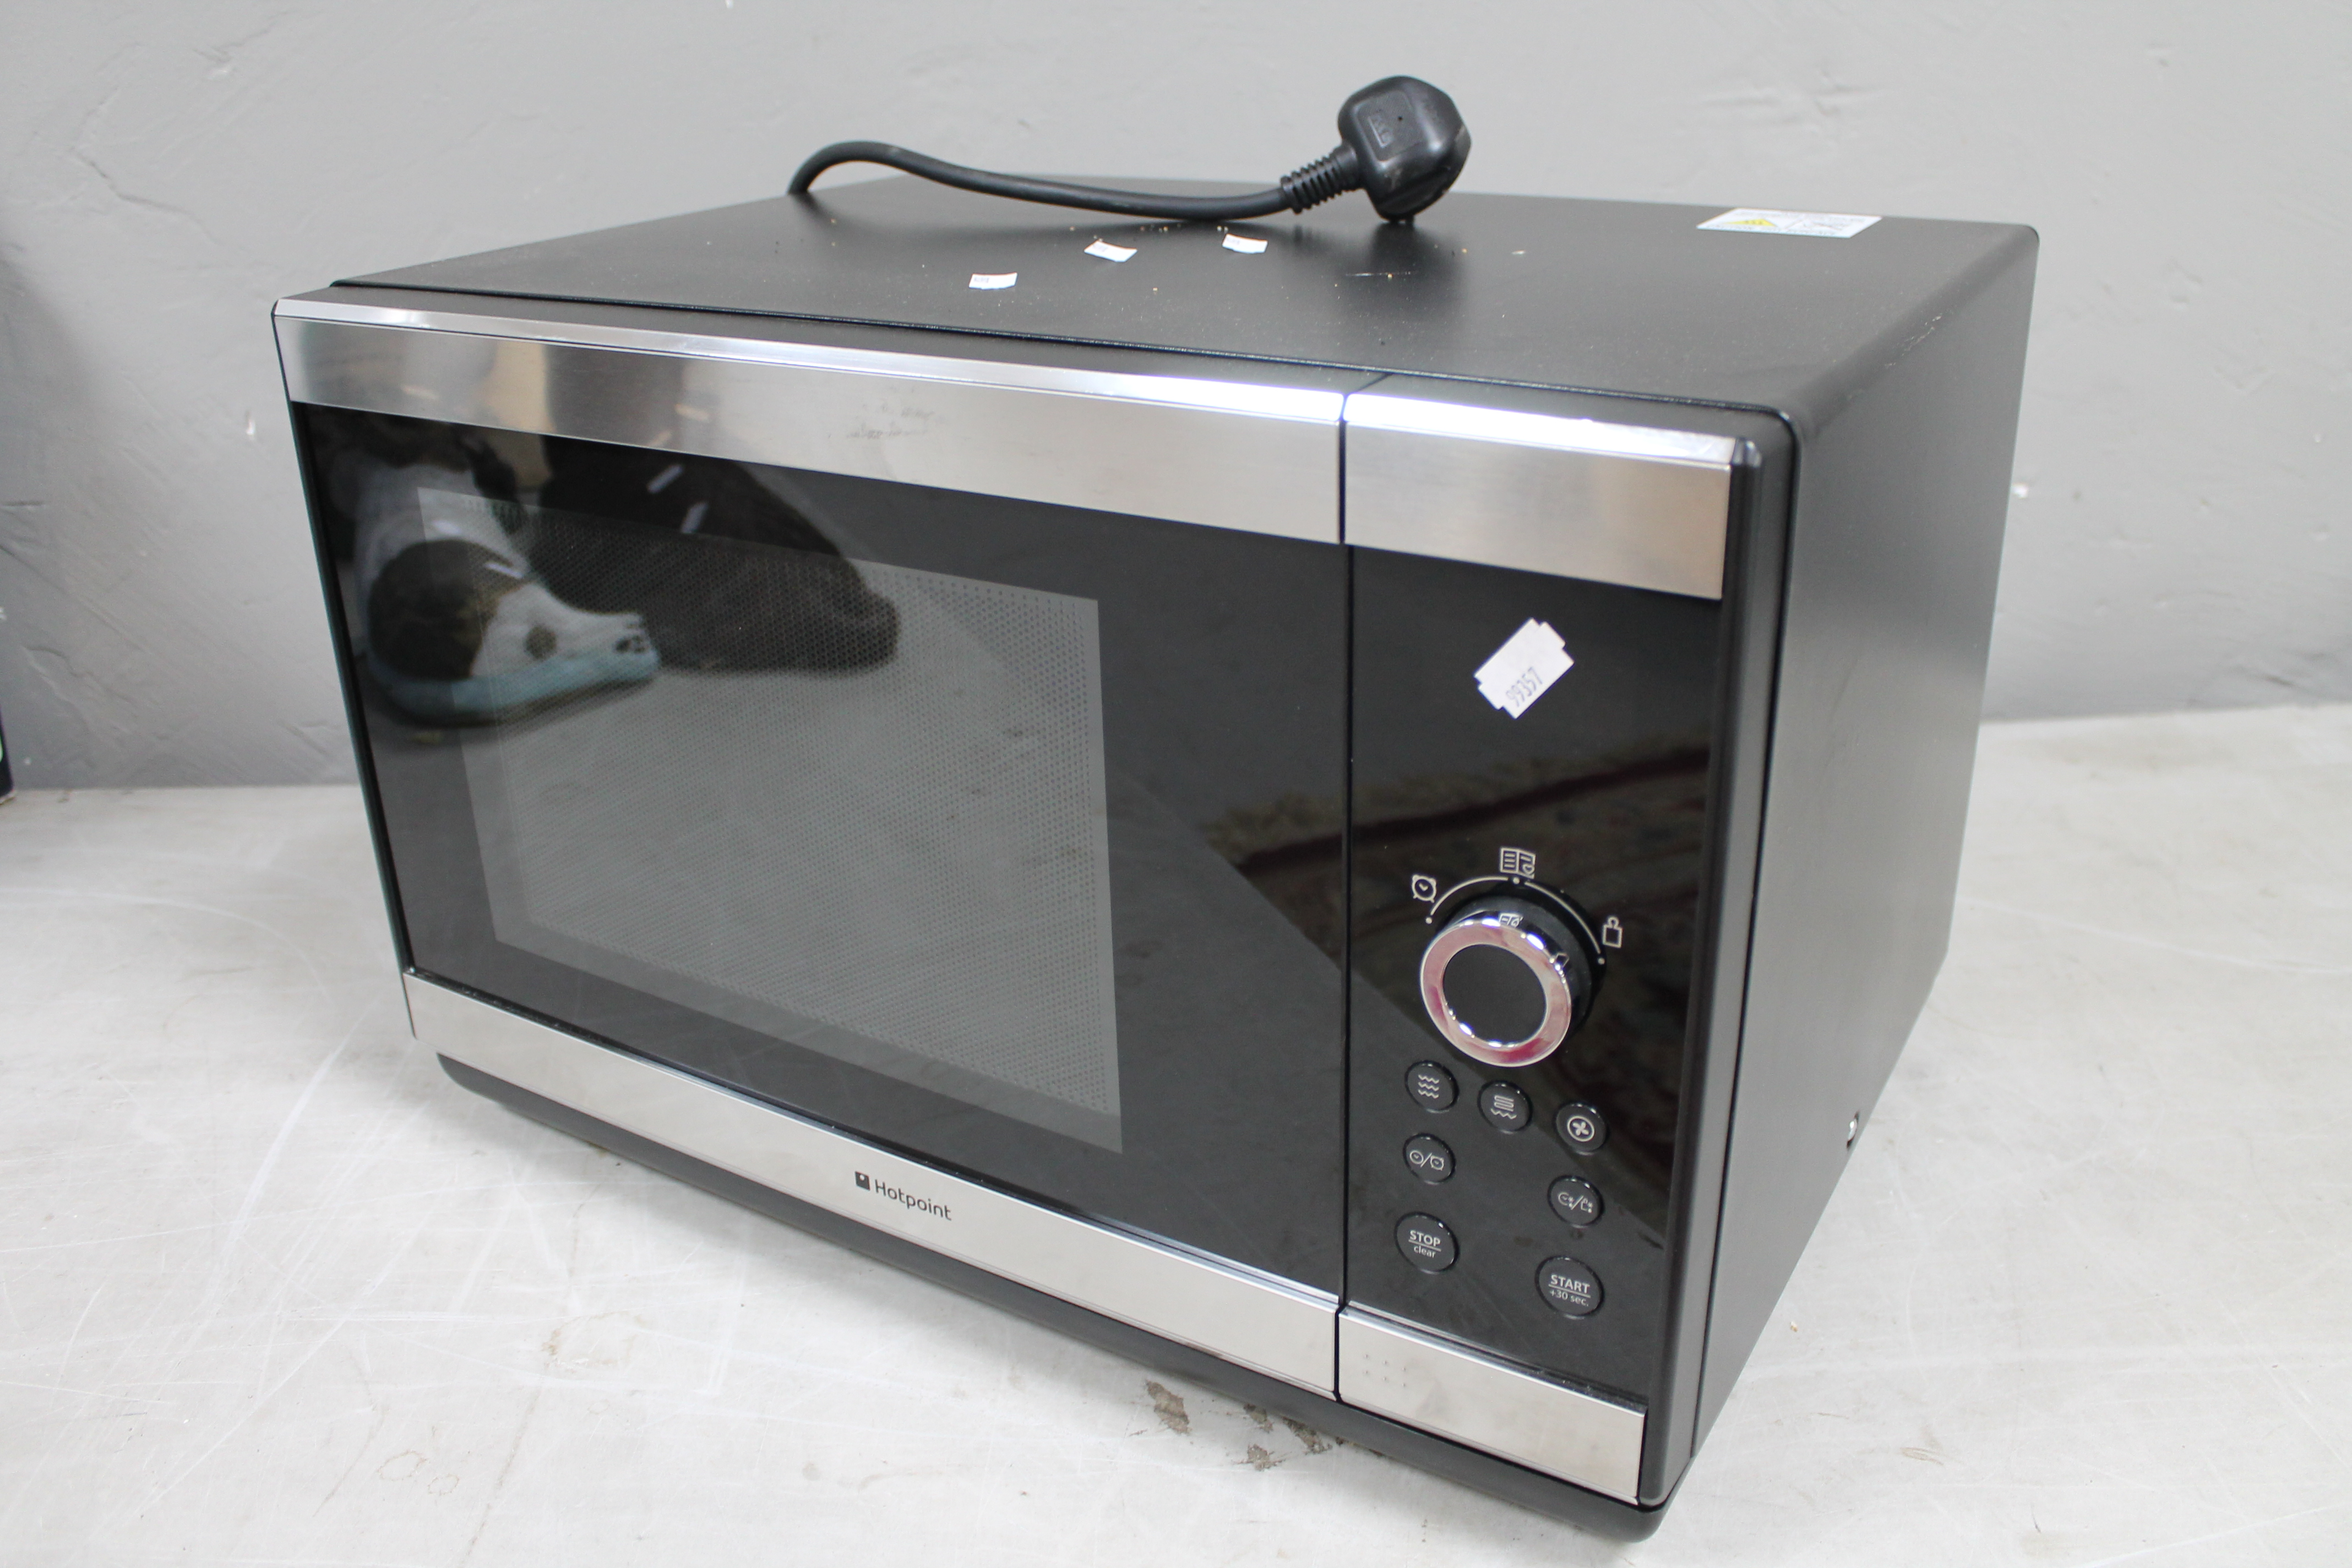 A Hotpoint microwave and a Russell Hobbs toaster